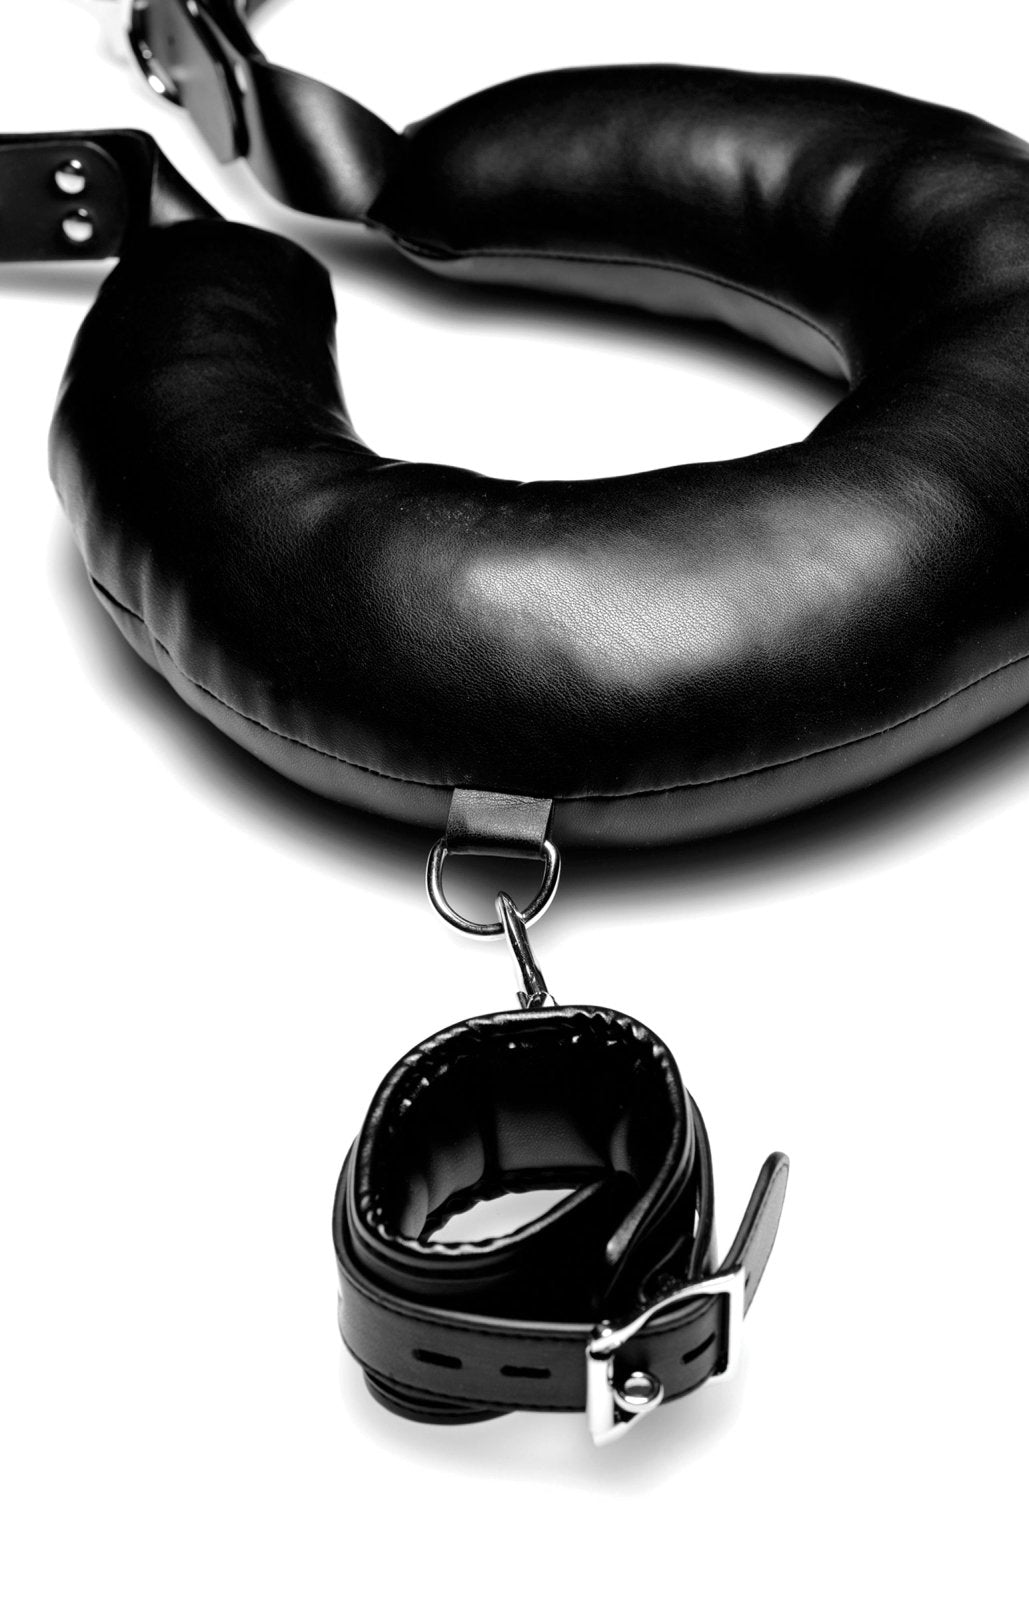 Padded Thigh Sling Restraint with Wrist Cuffs picture